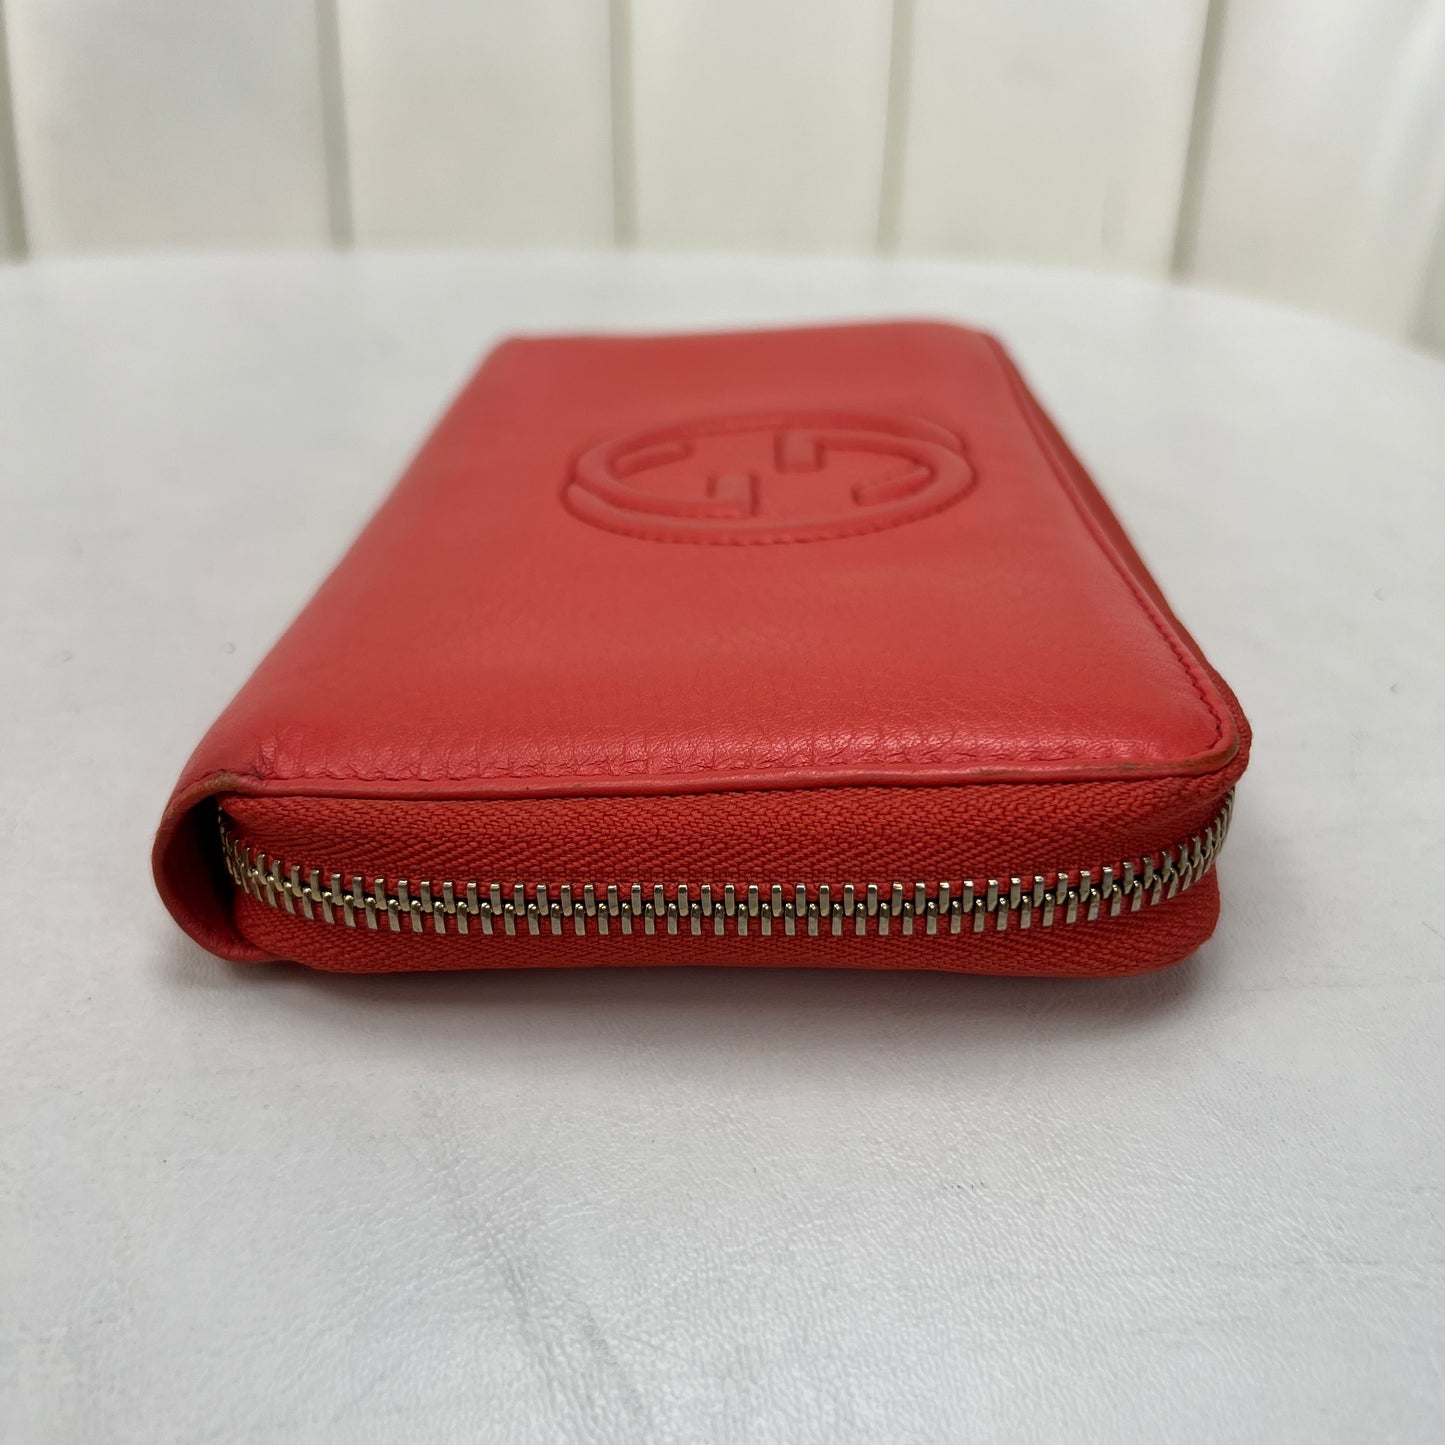 Gucci Pebbled Leather Wallet